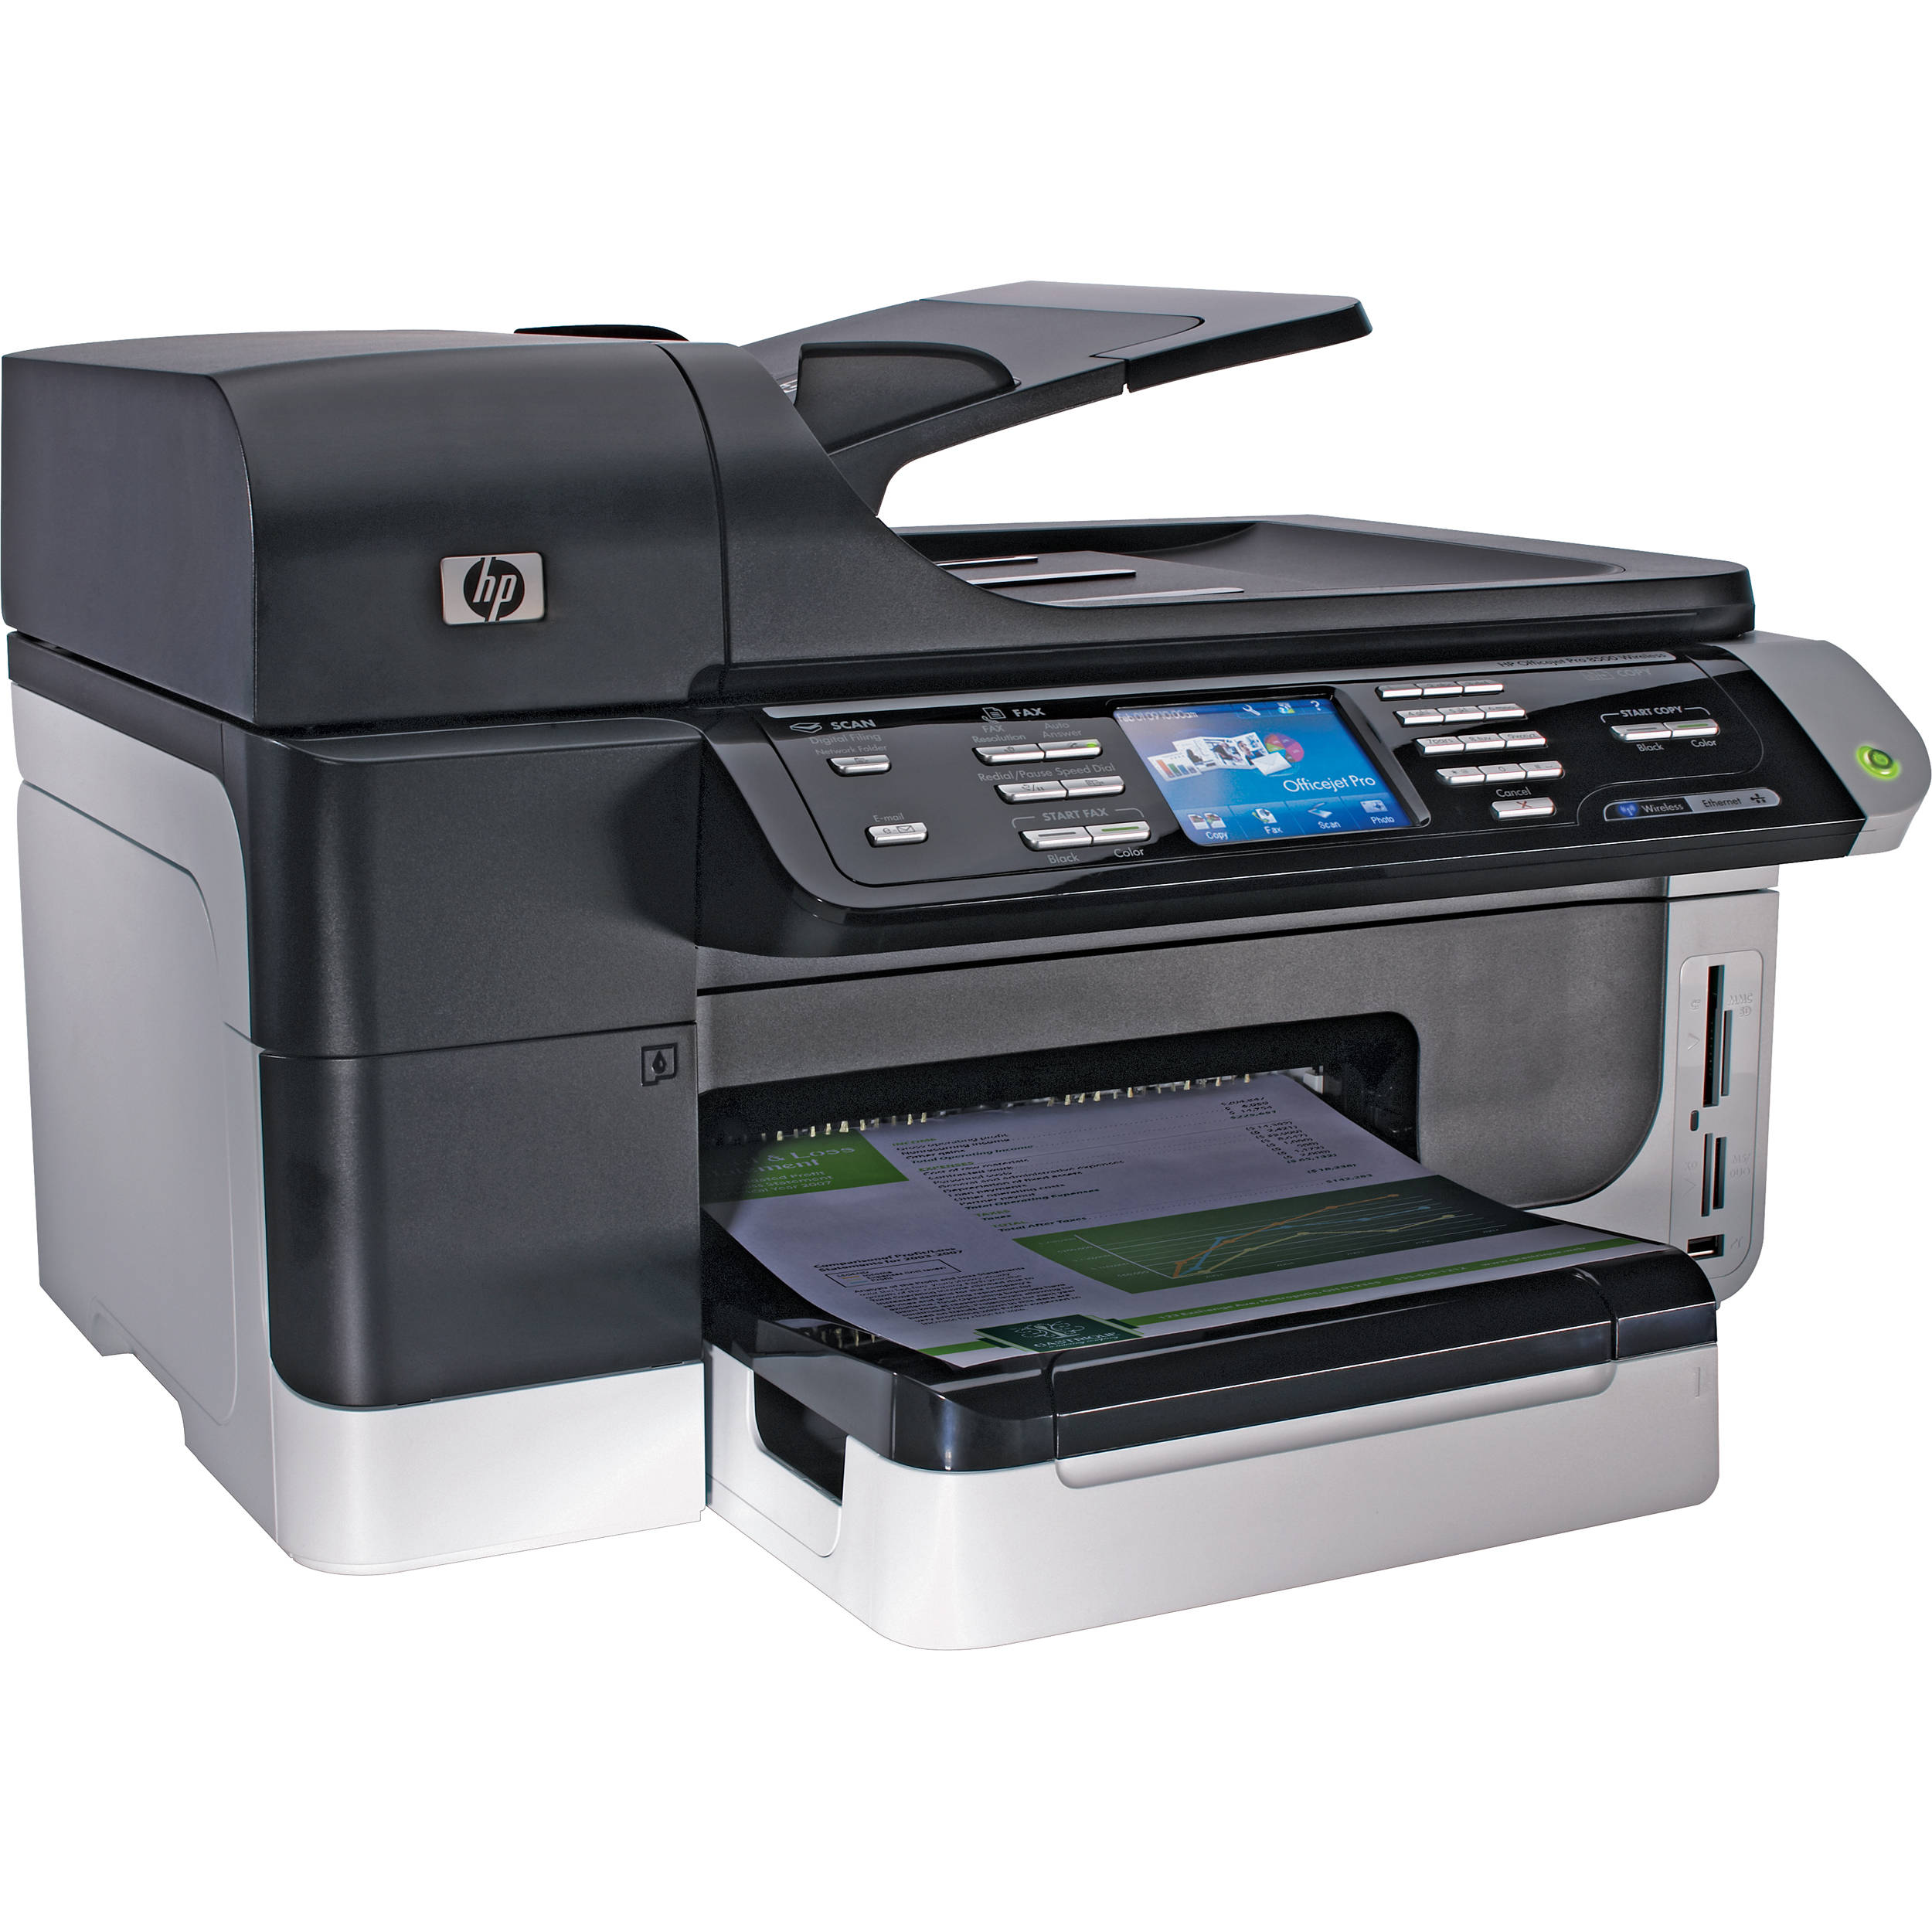 Hp Officejet Pro 8500 Wireless All In One Printer Cb023ab1h Bandh 6670